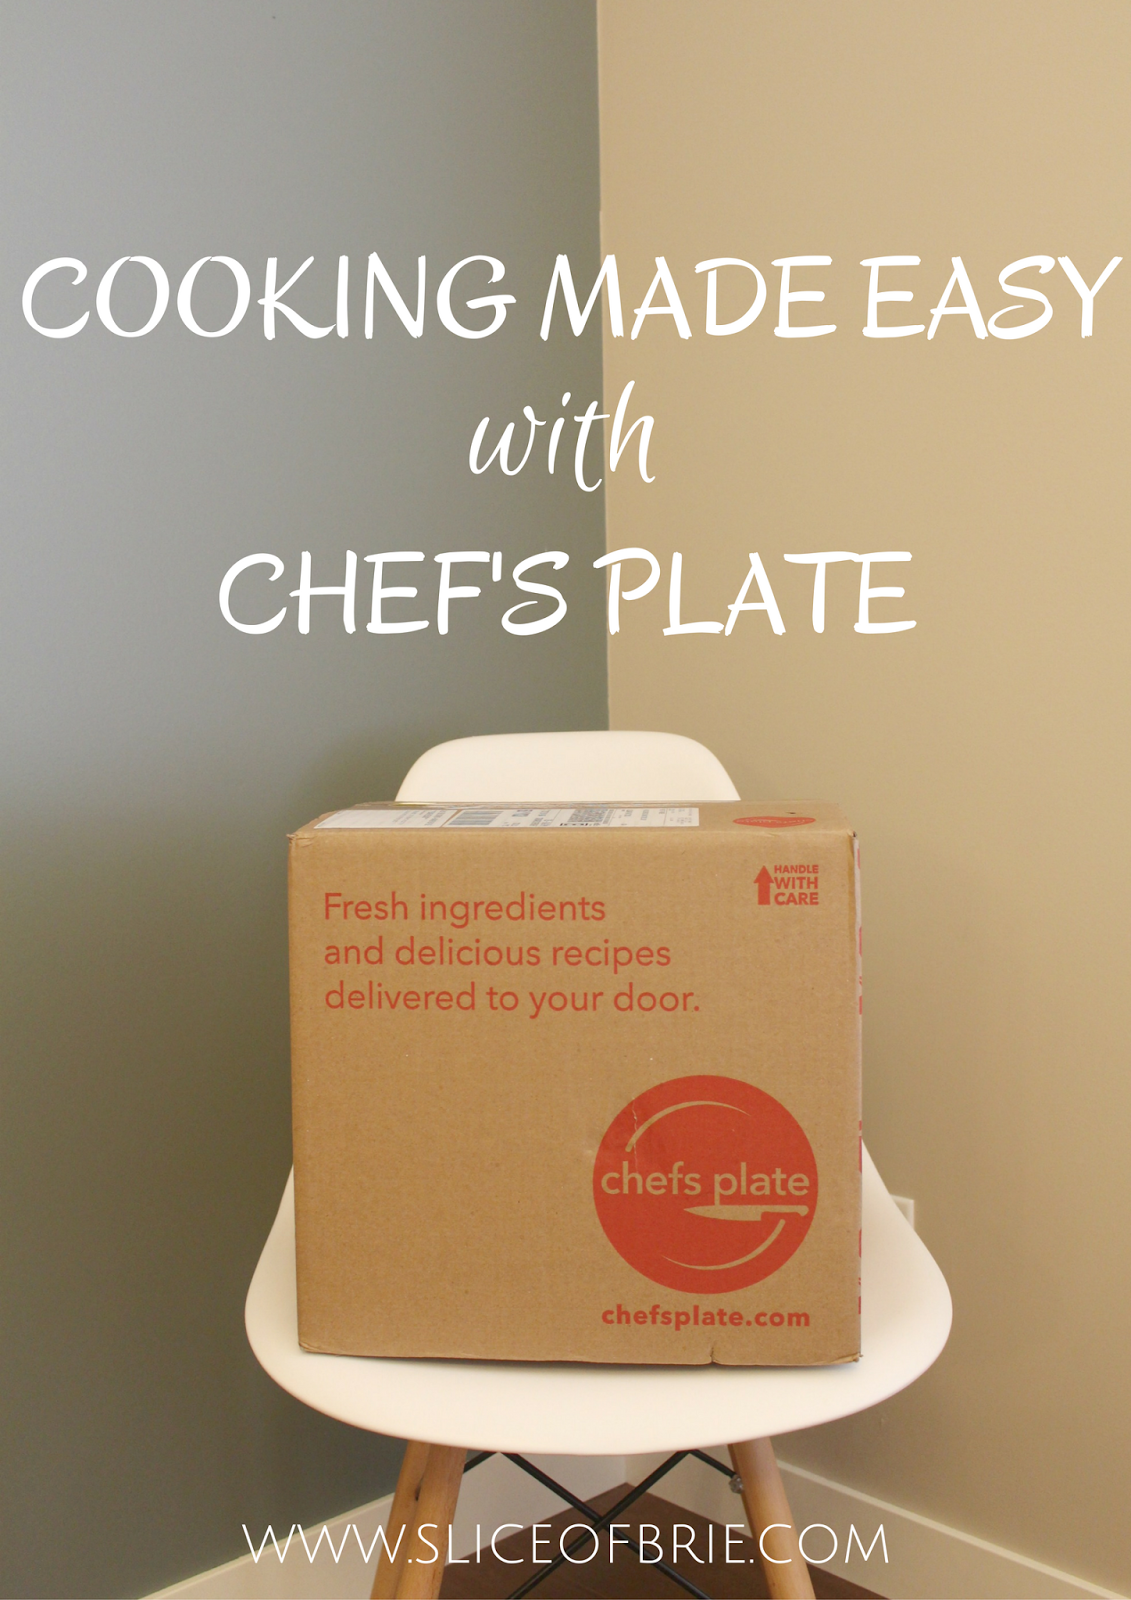 Chef's Plate Meal Delivery Service Review